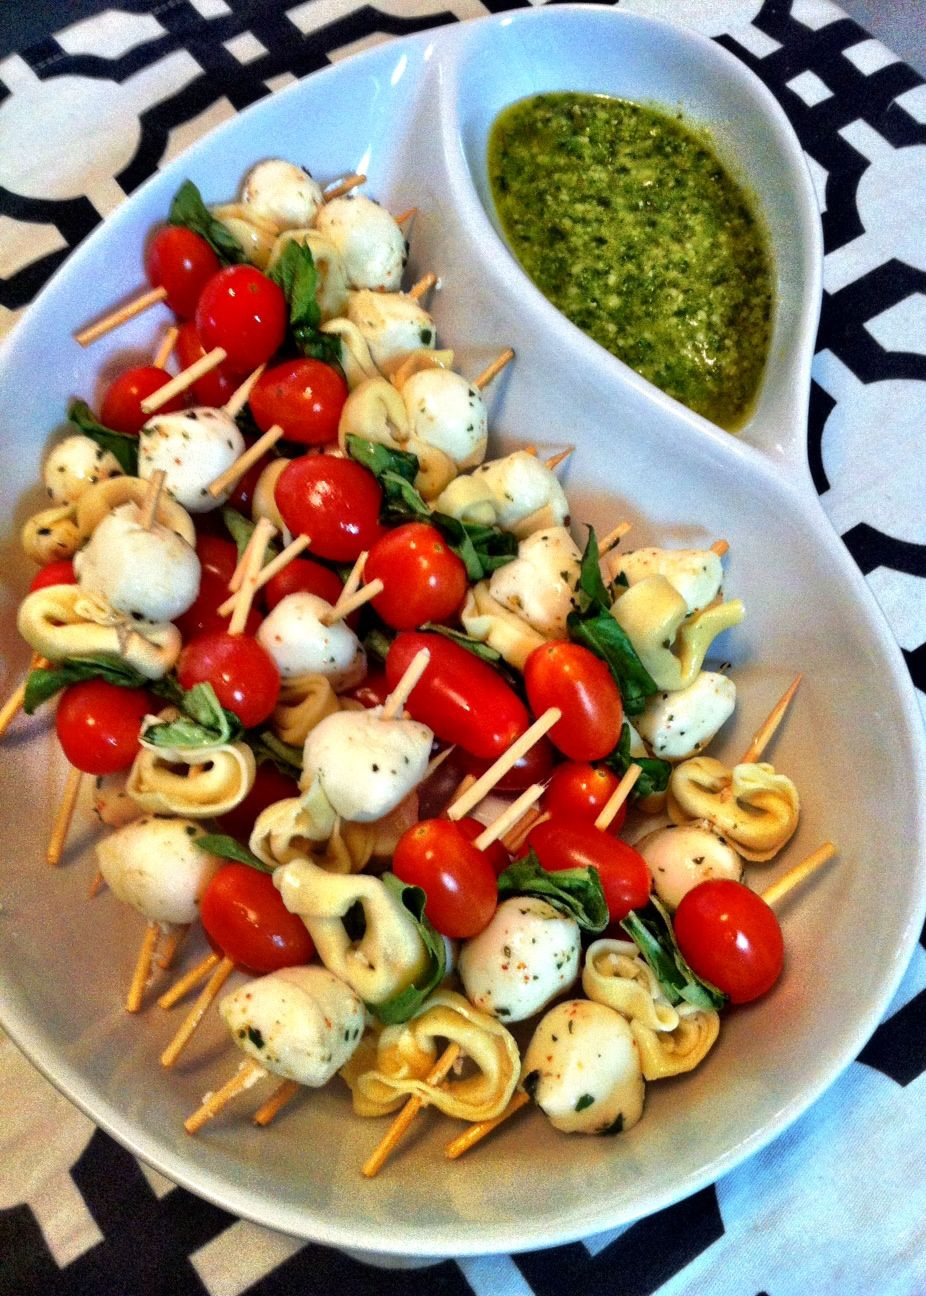 Summer Party Menu Ideas For A Crowd
 Easy Appetizers For A Crowd